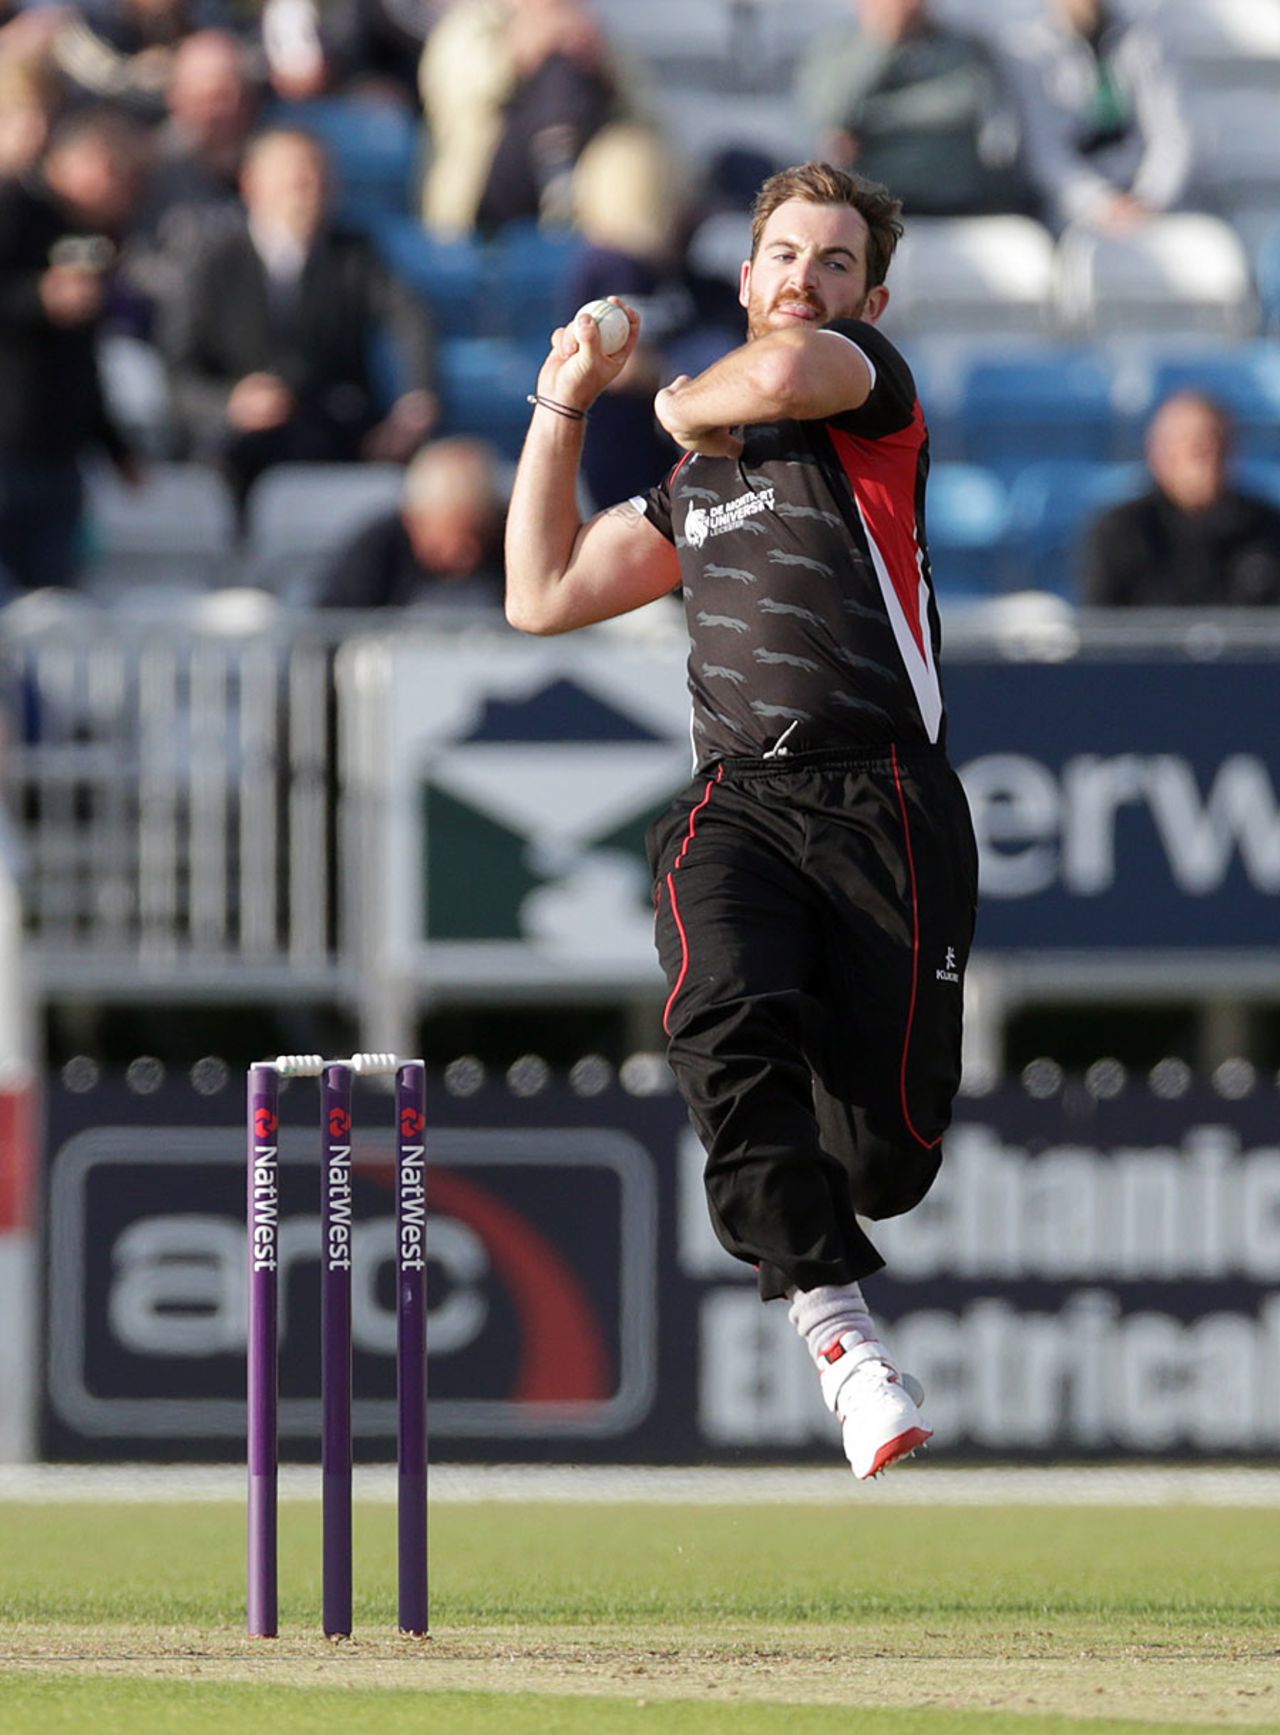 Ben Raine arrives at the crease, Derbyshire v Leicestershire, NatWest T20 Blast, North Group, Derby, May 18, 2015